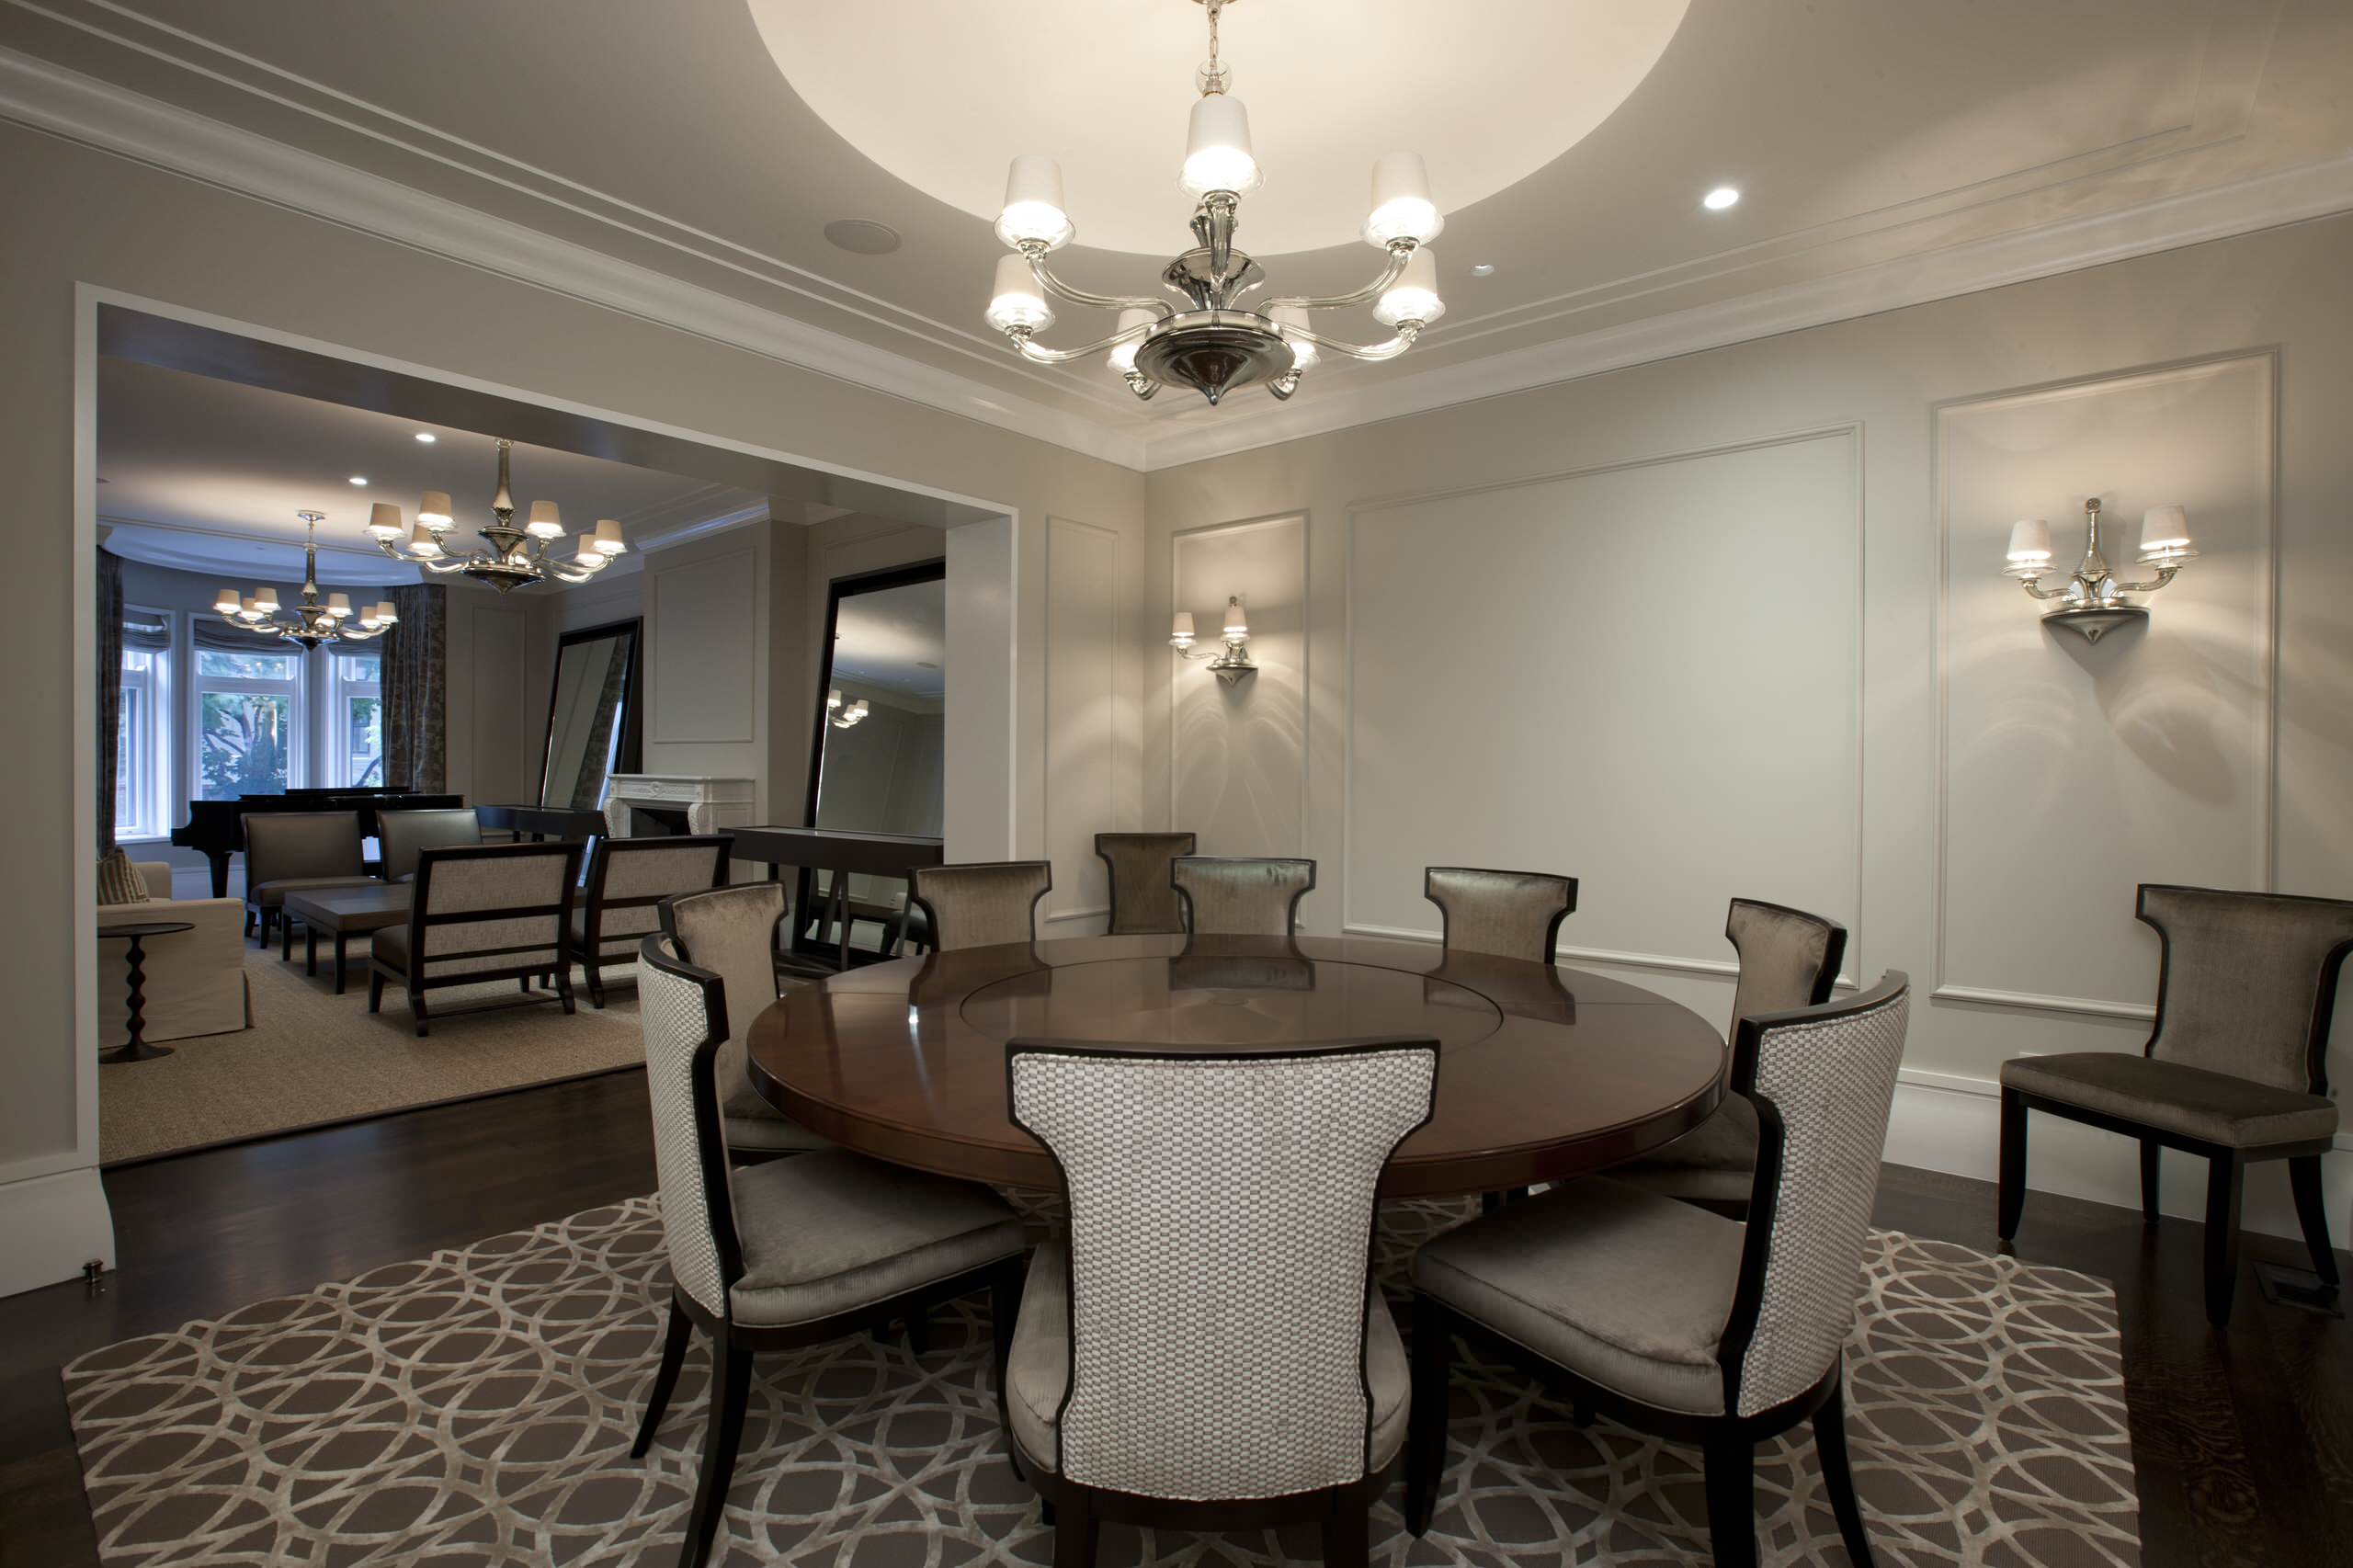 70 Inch Round Table Ideas Photos Houzz, 70 Inch Round Dining Room Table